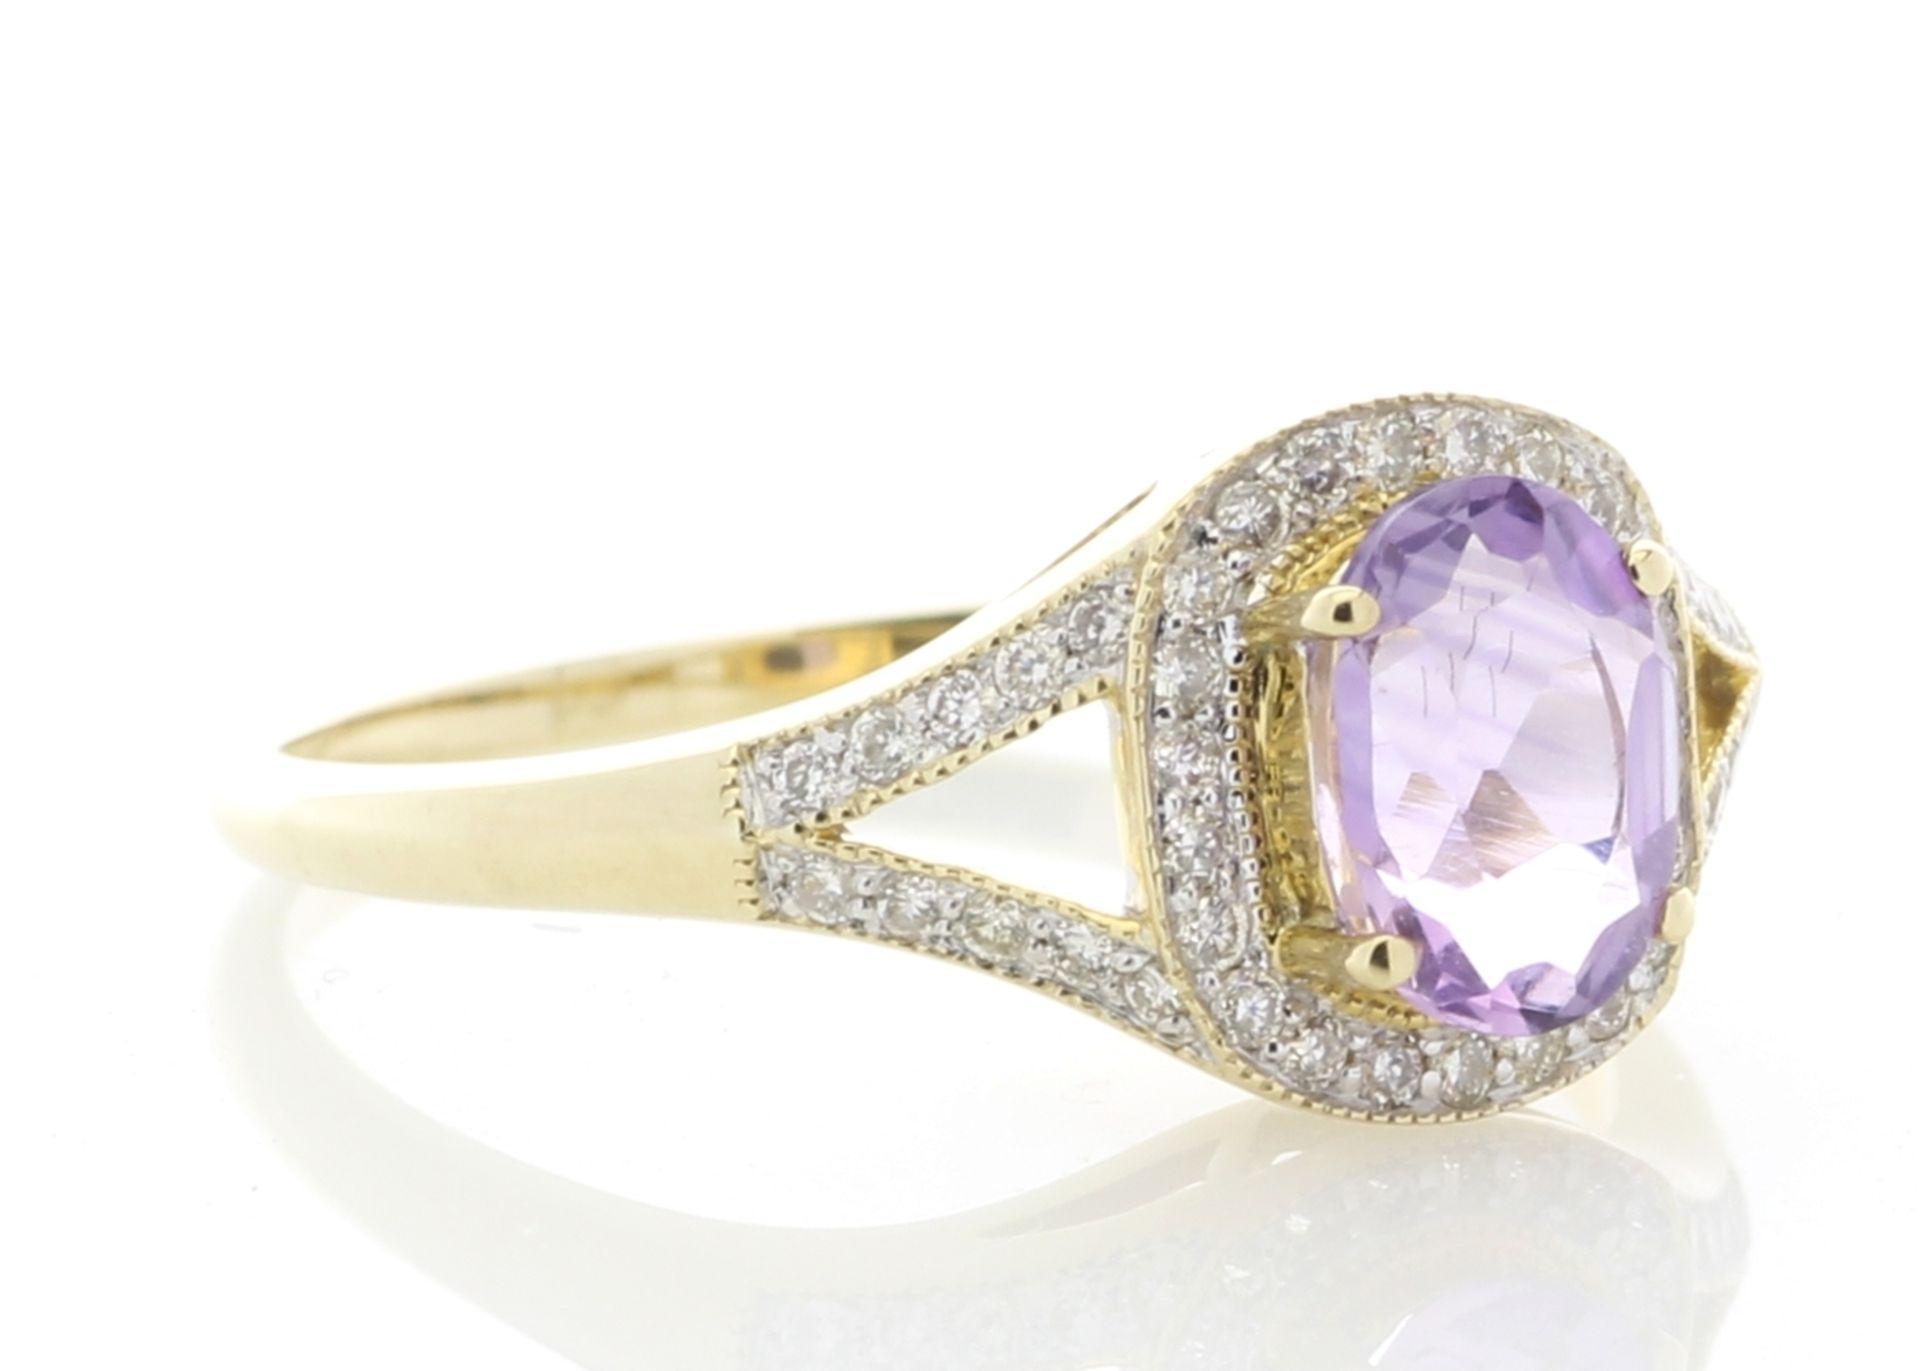 9ct Yellow Gold Amethyst And Diamond Halo Set Ring 0.21 Carats - Valued by GIE £2,445.00 - This - Image 4 of 5